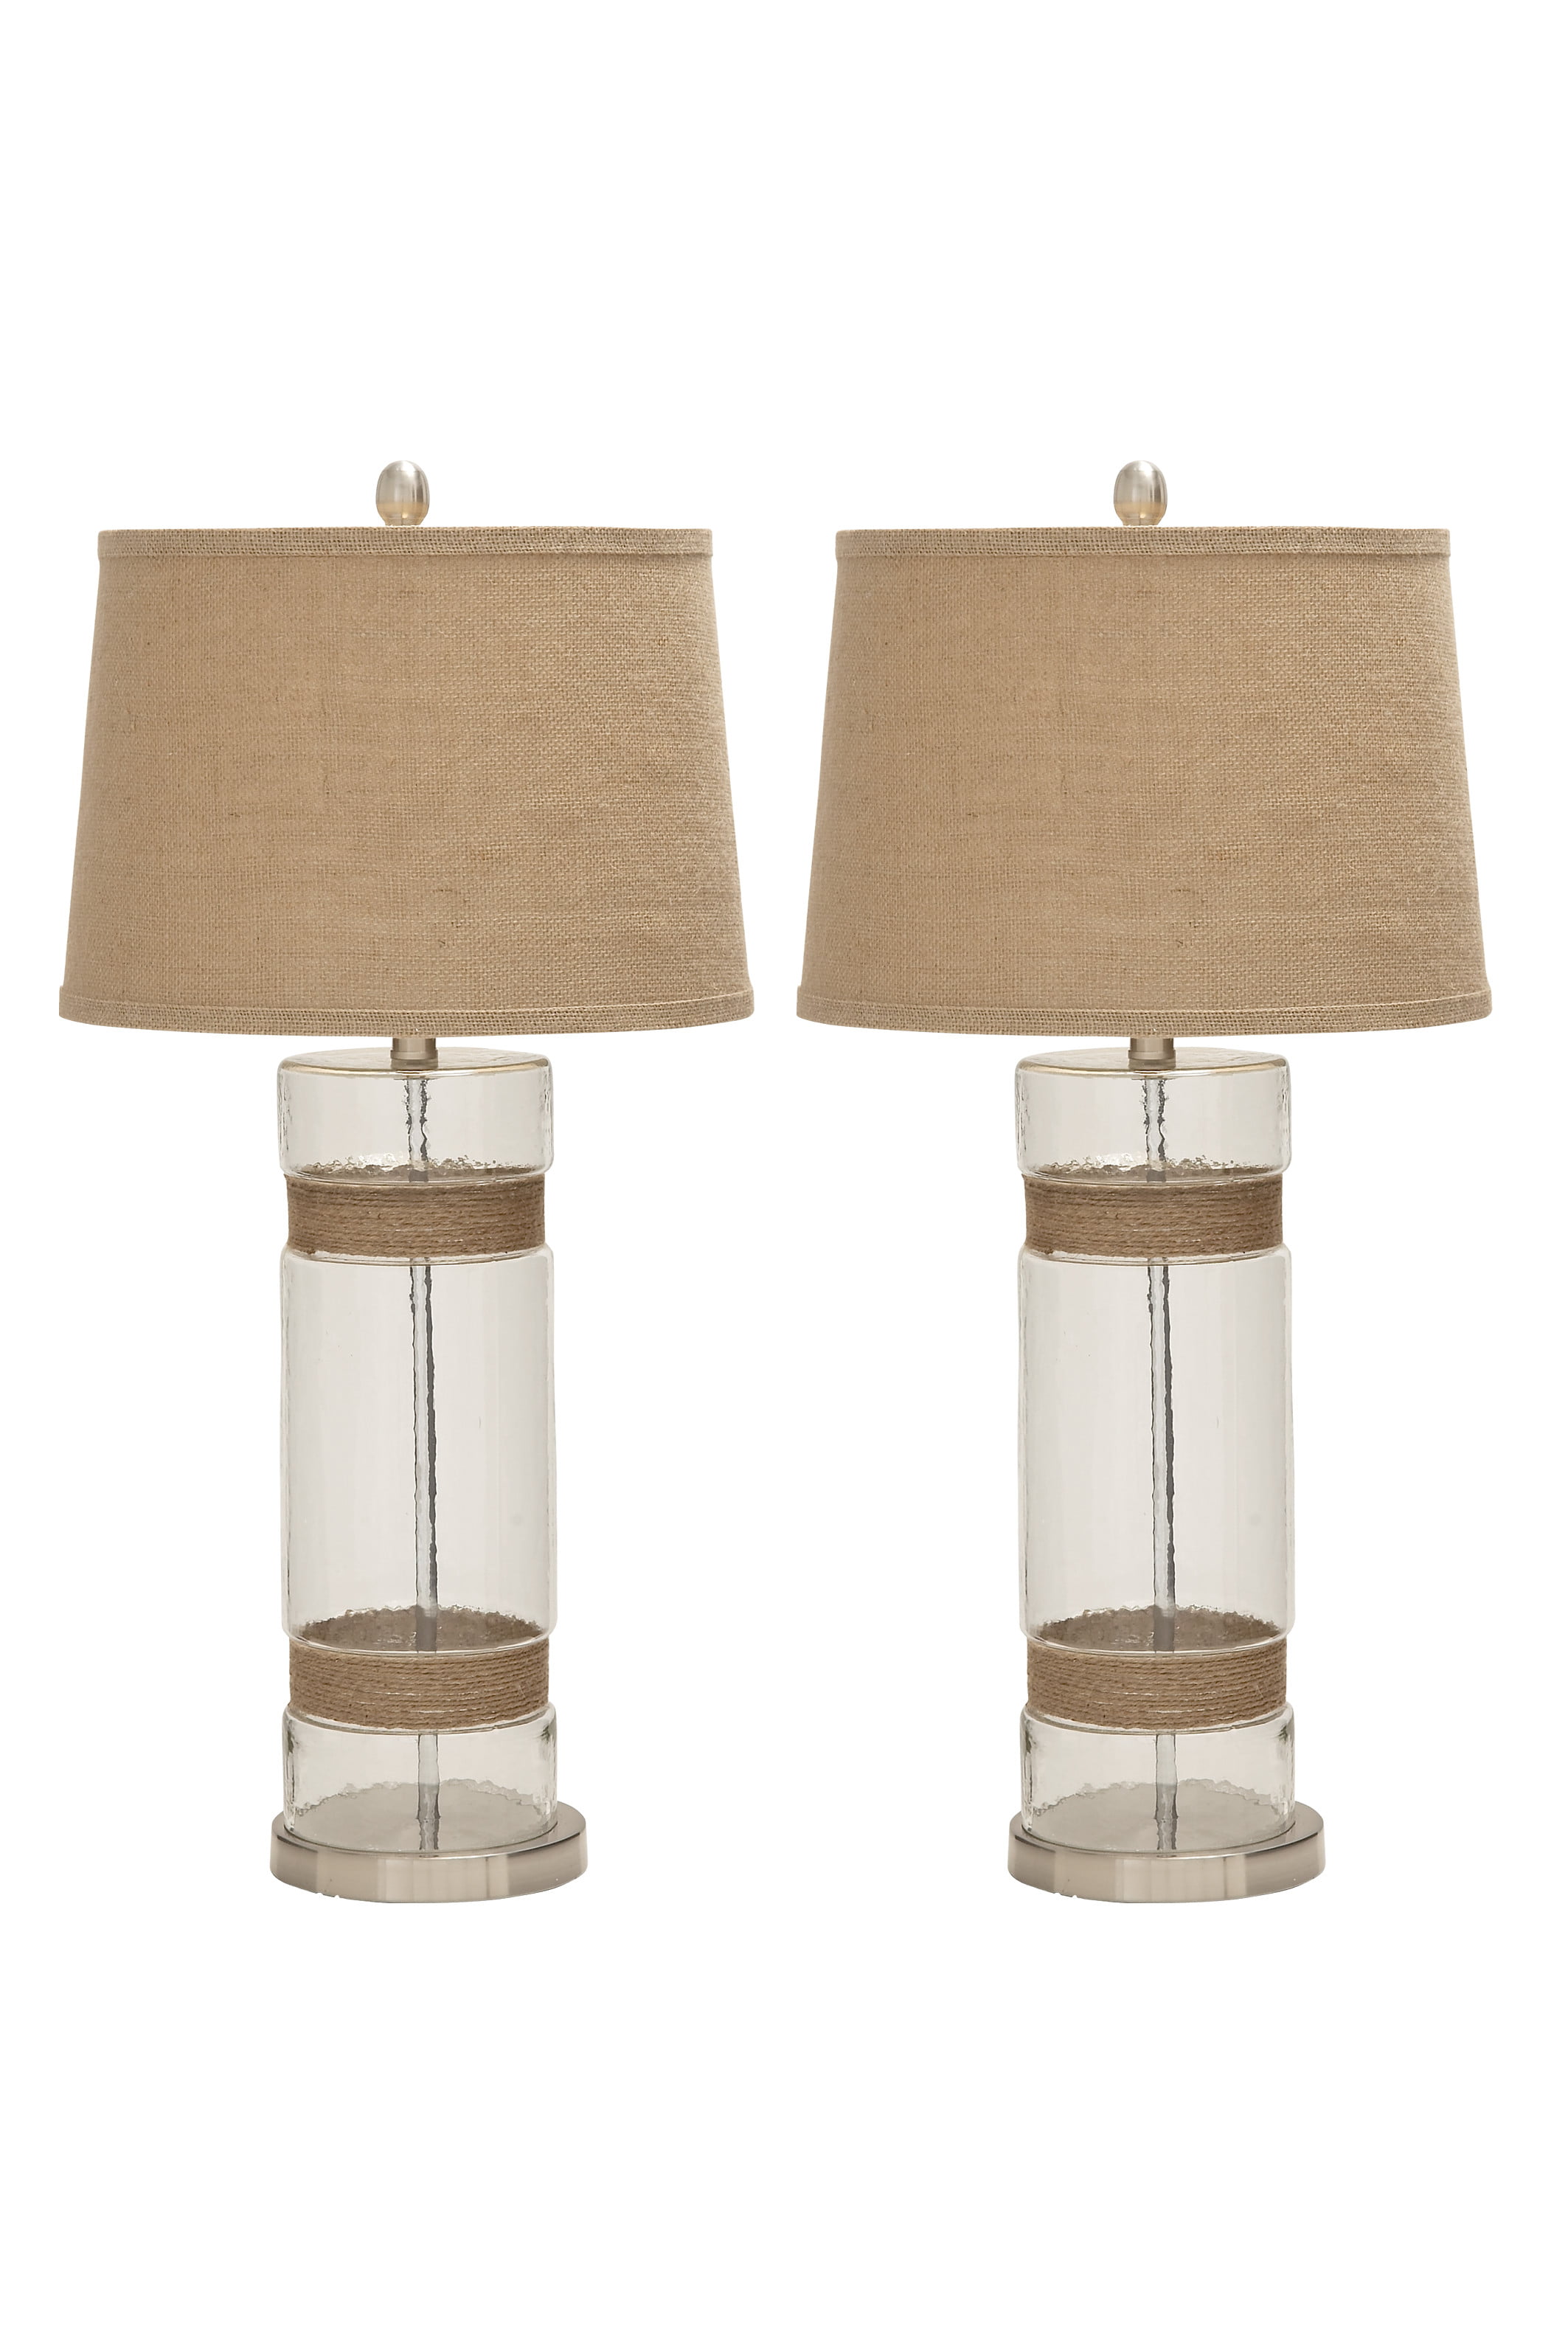 Decmode Silver Glass Rustic Table Lamp, Rustic Glass Table Lamps